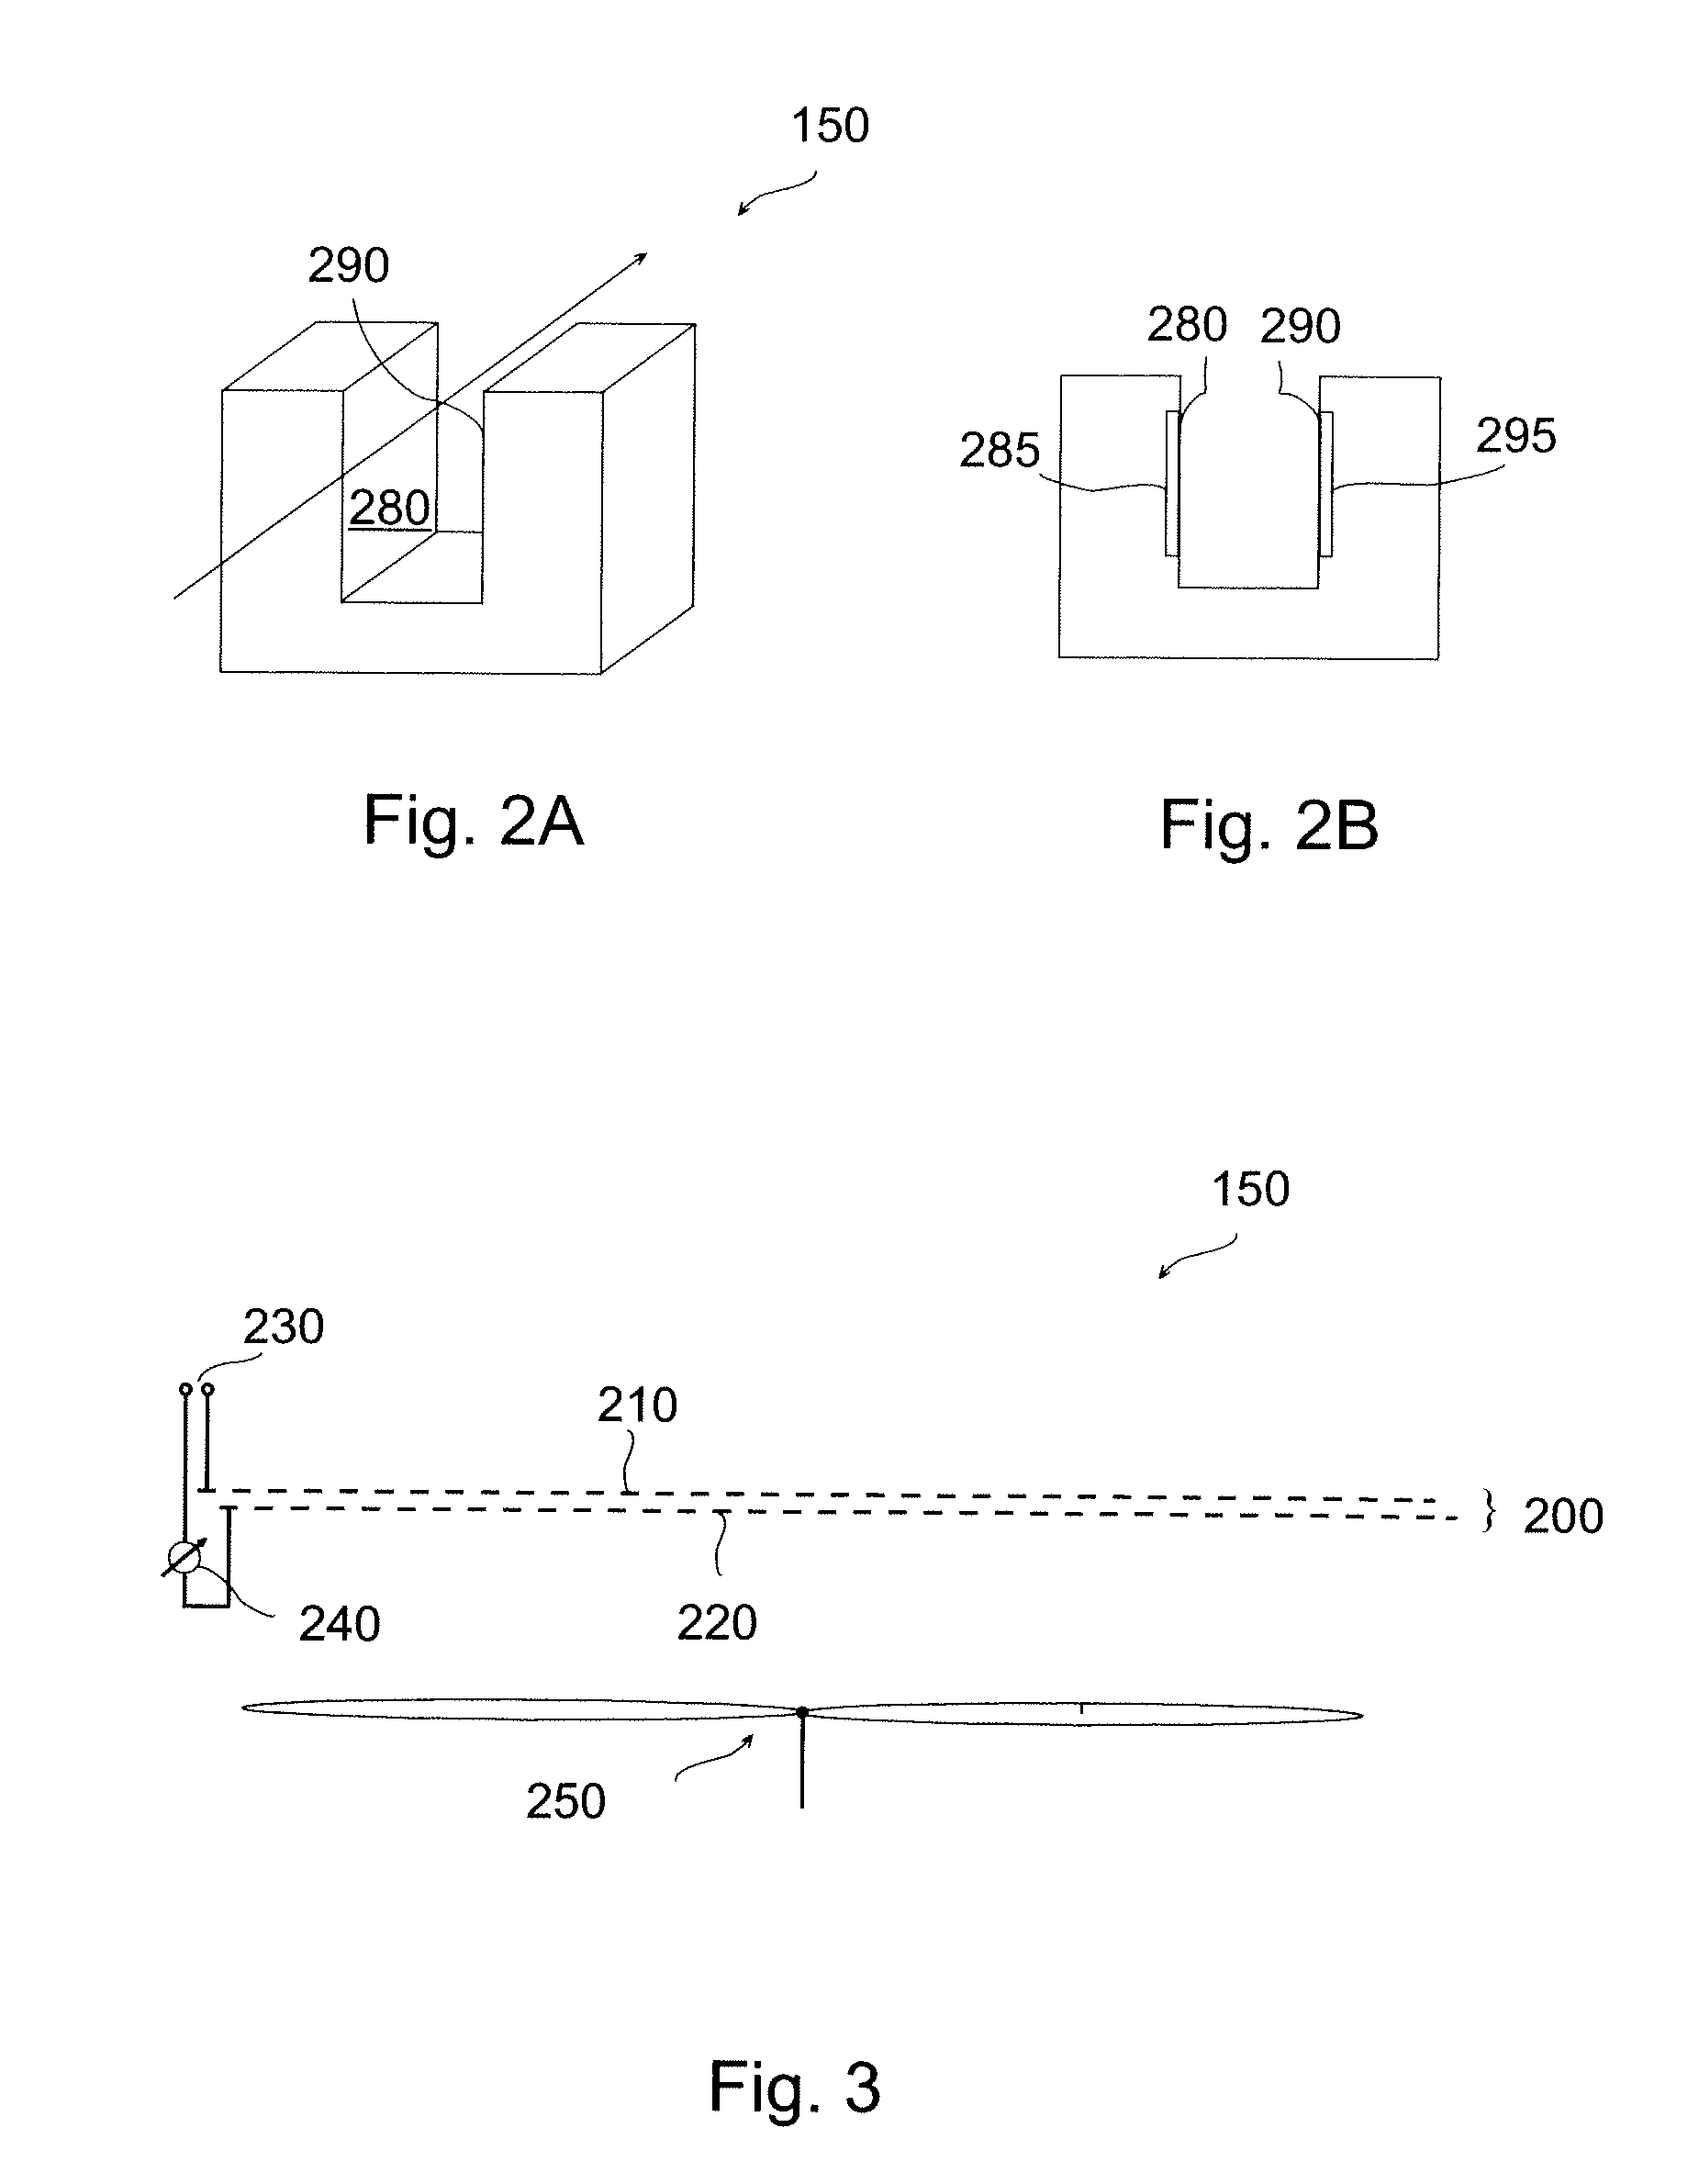 Wind energy system having an insect sensor